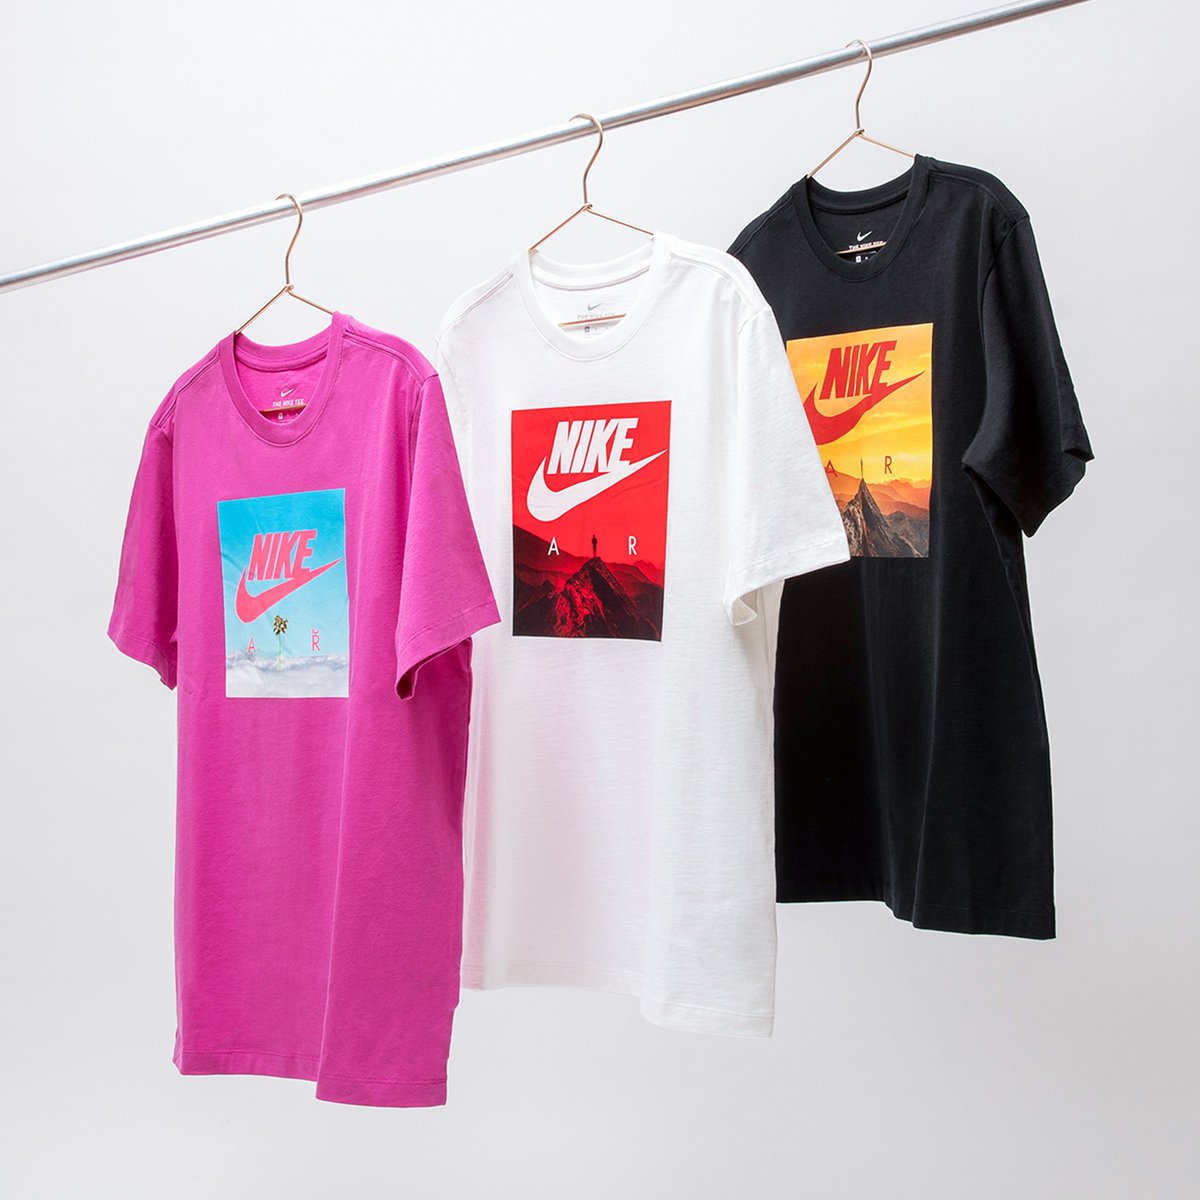 nike graphic t